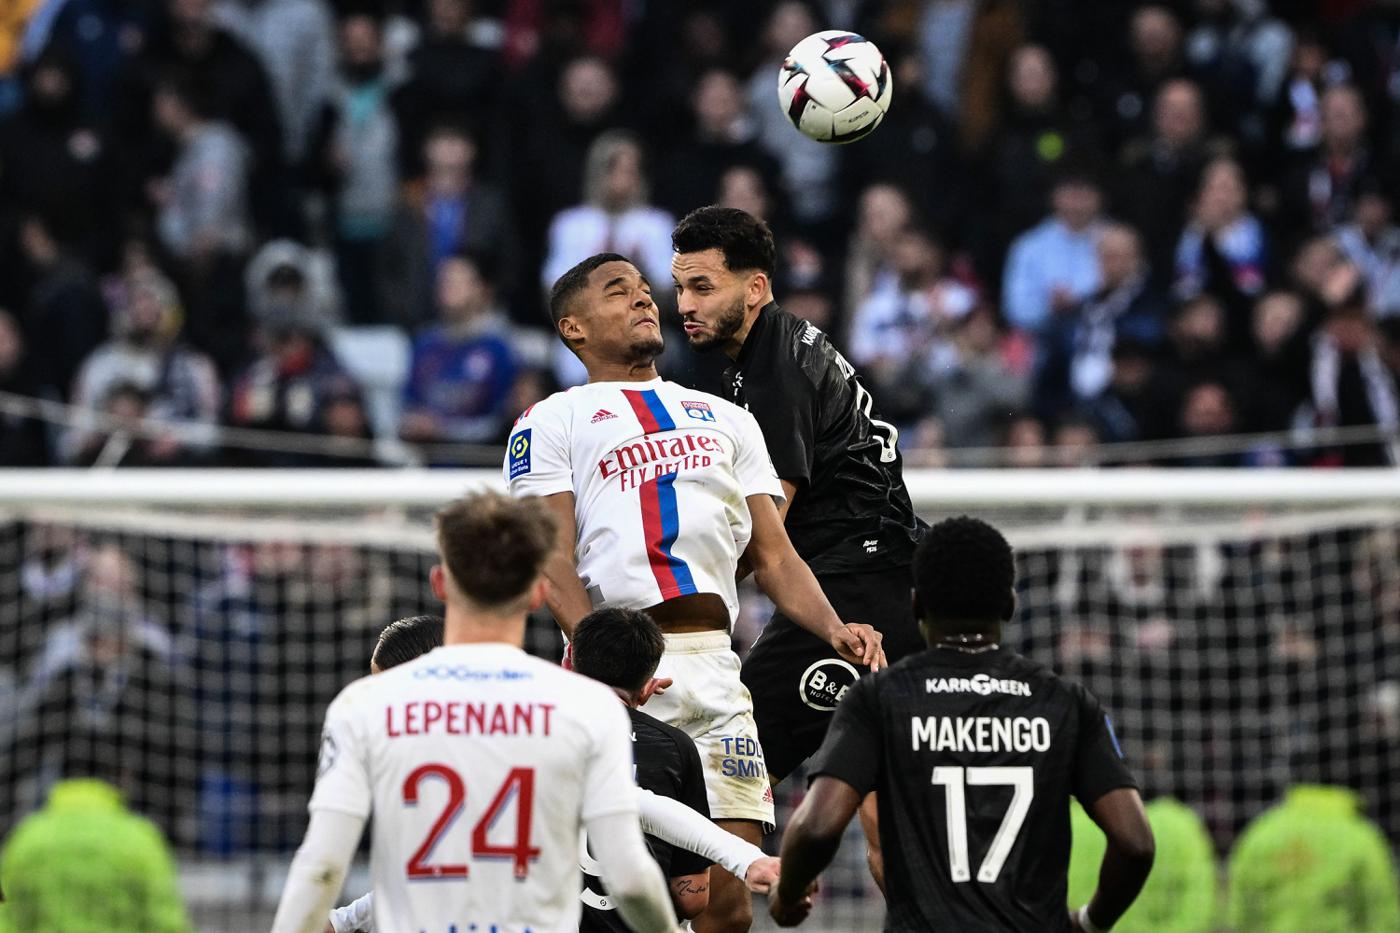 Lyon - Lorient - 0:0. French Championship, 26th round. Match review, statistics